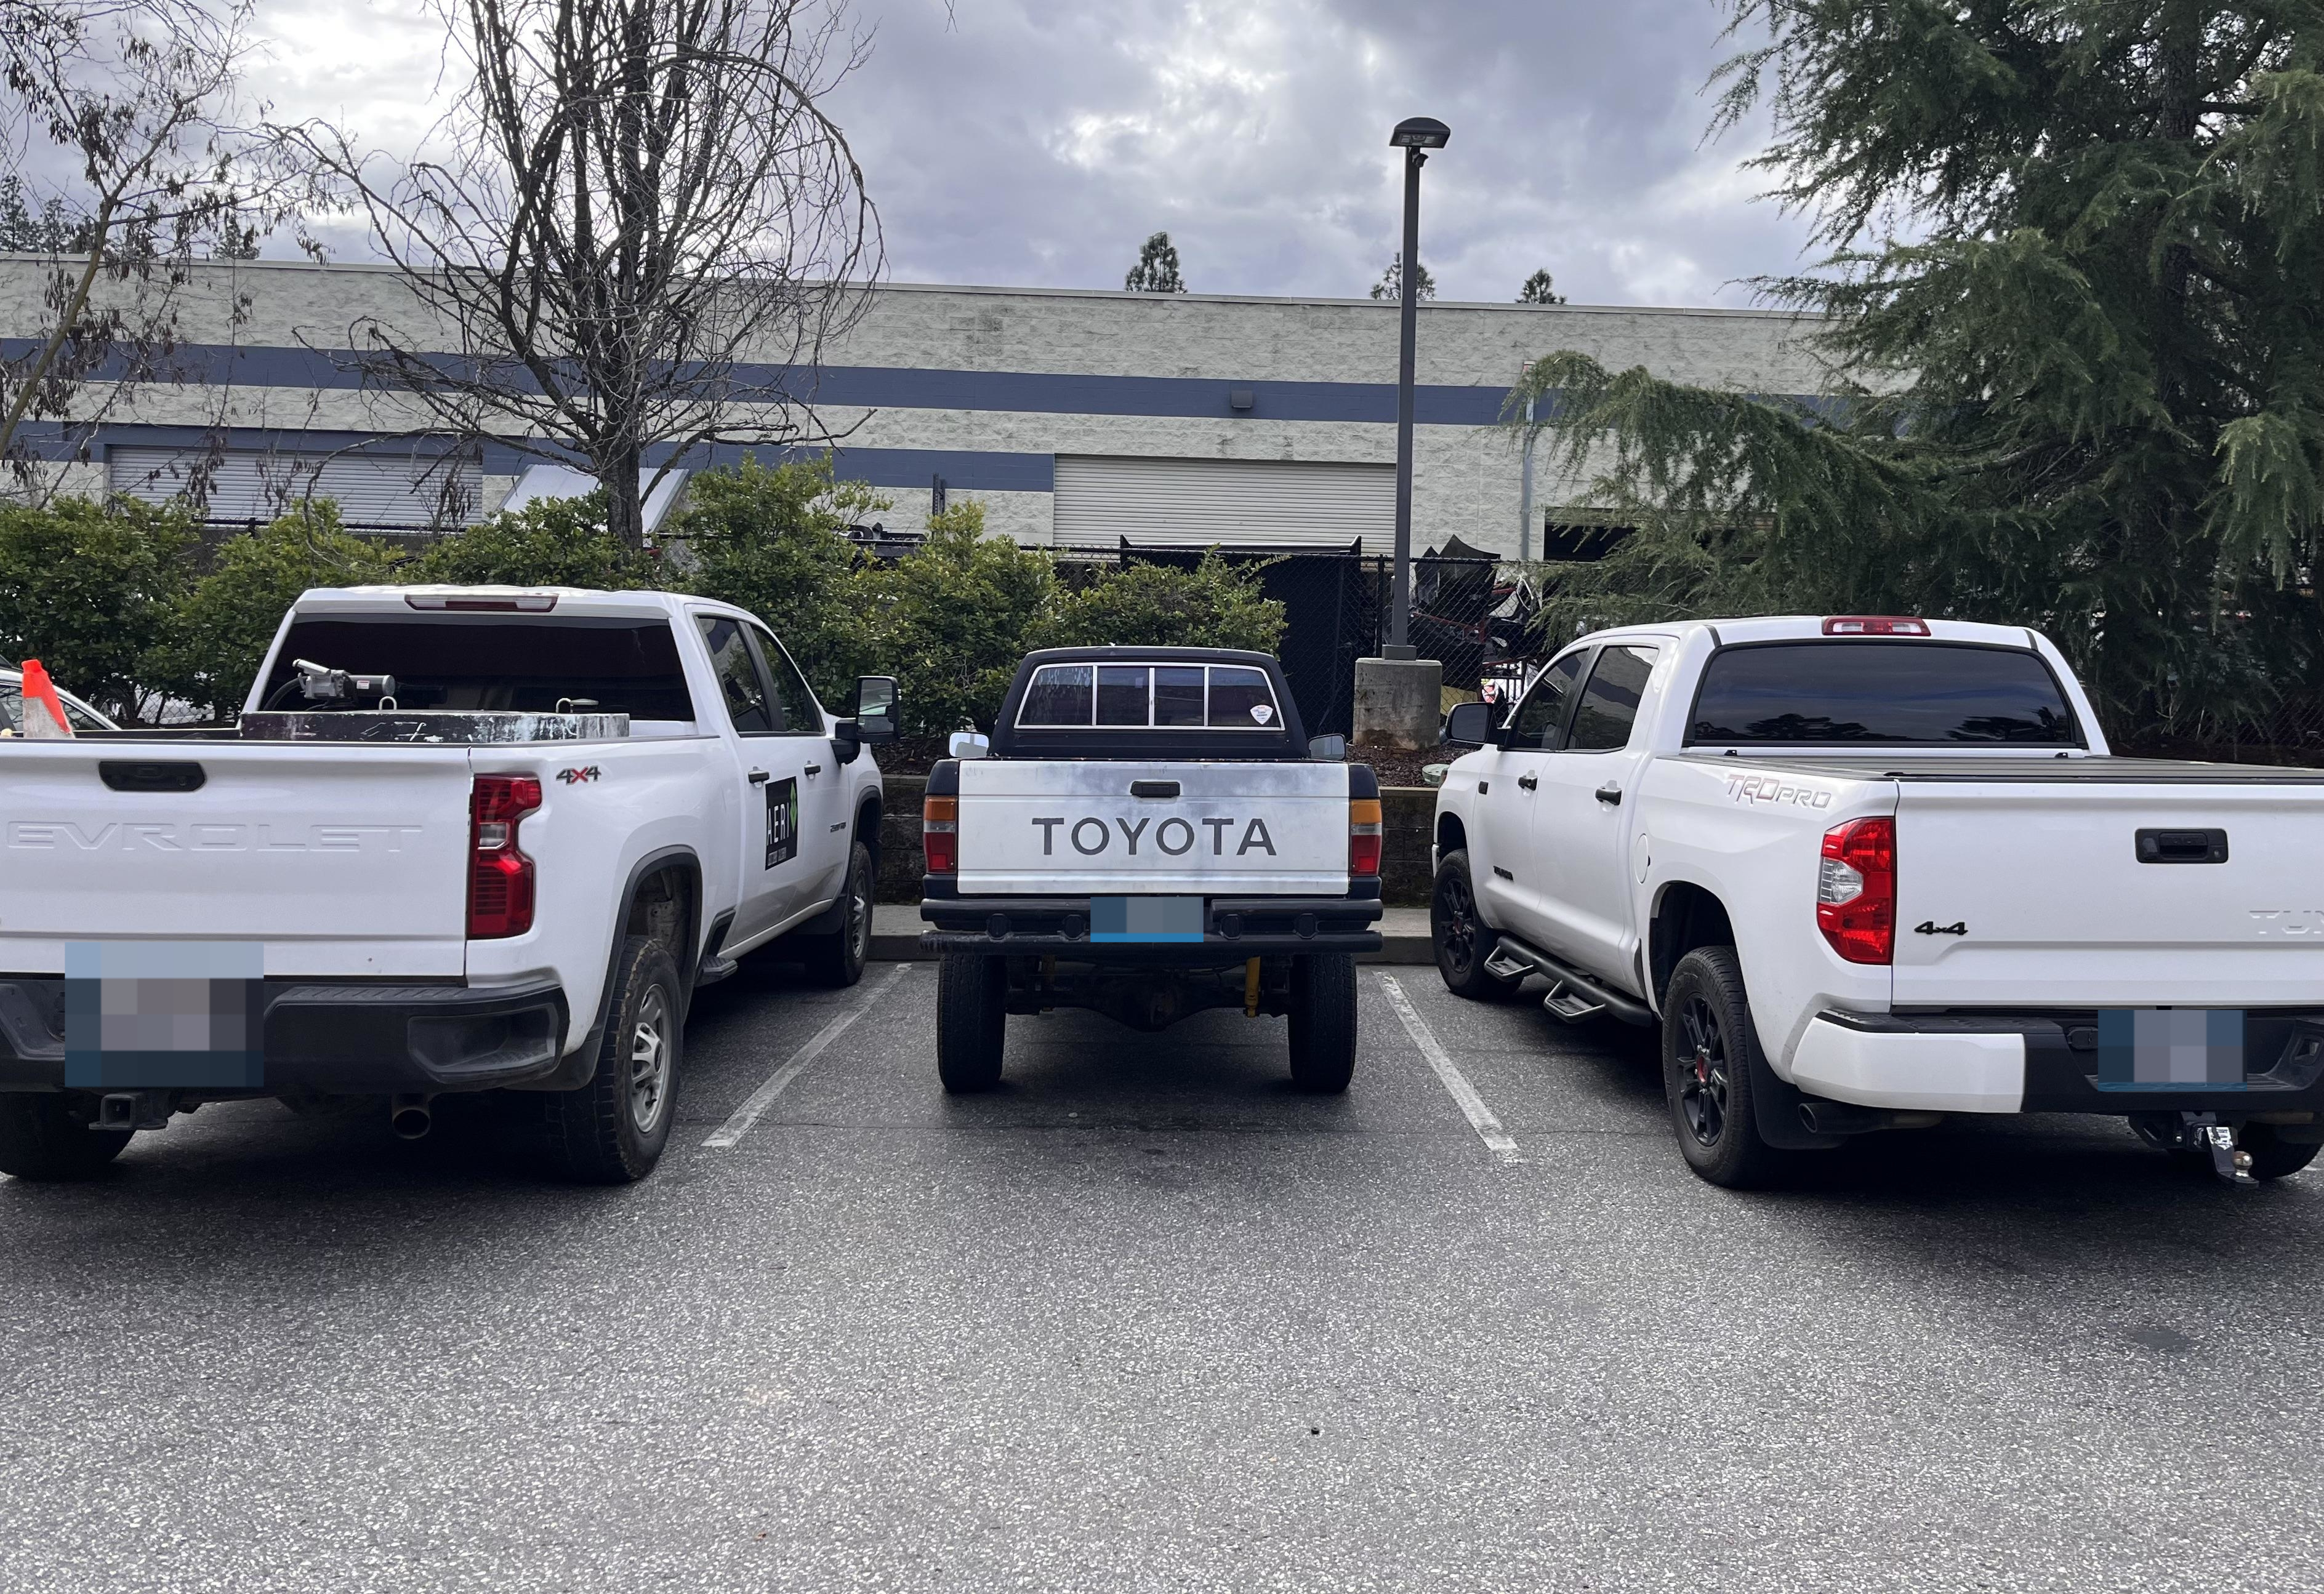 Three pickup trucks parked, the middle Toyota occupies two spaces